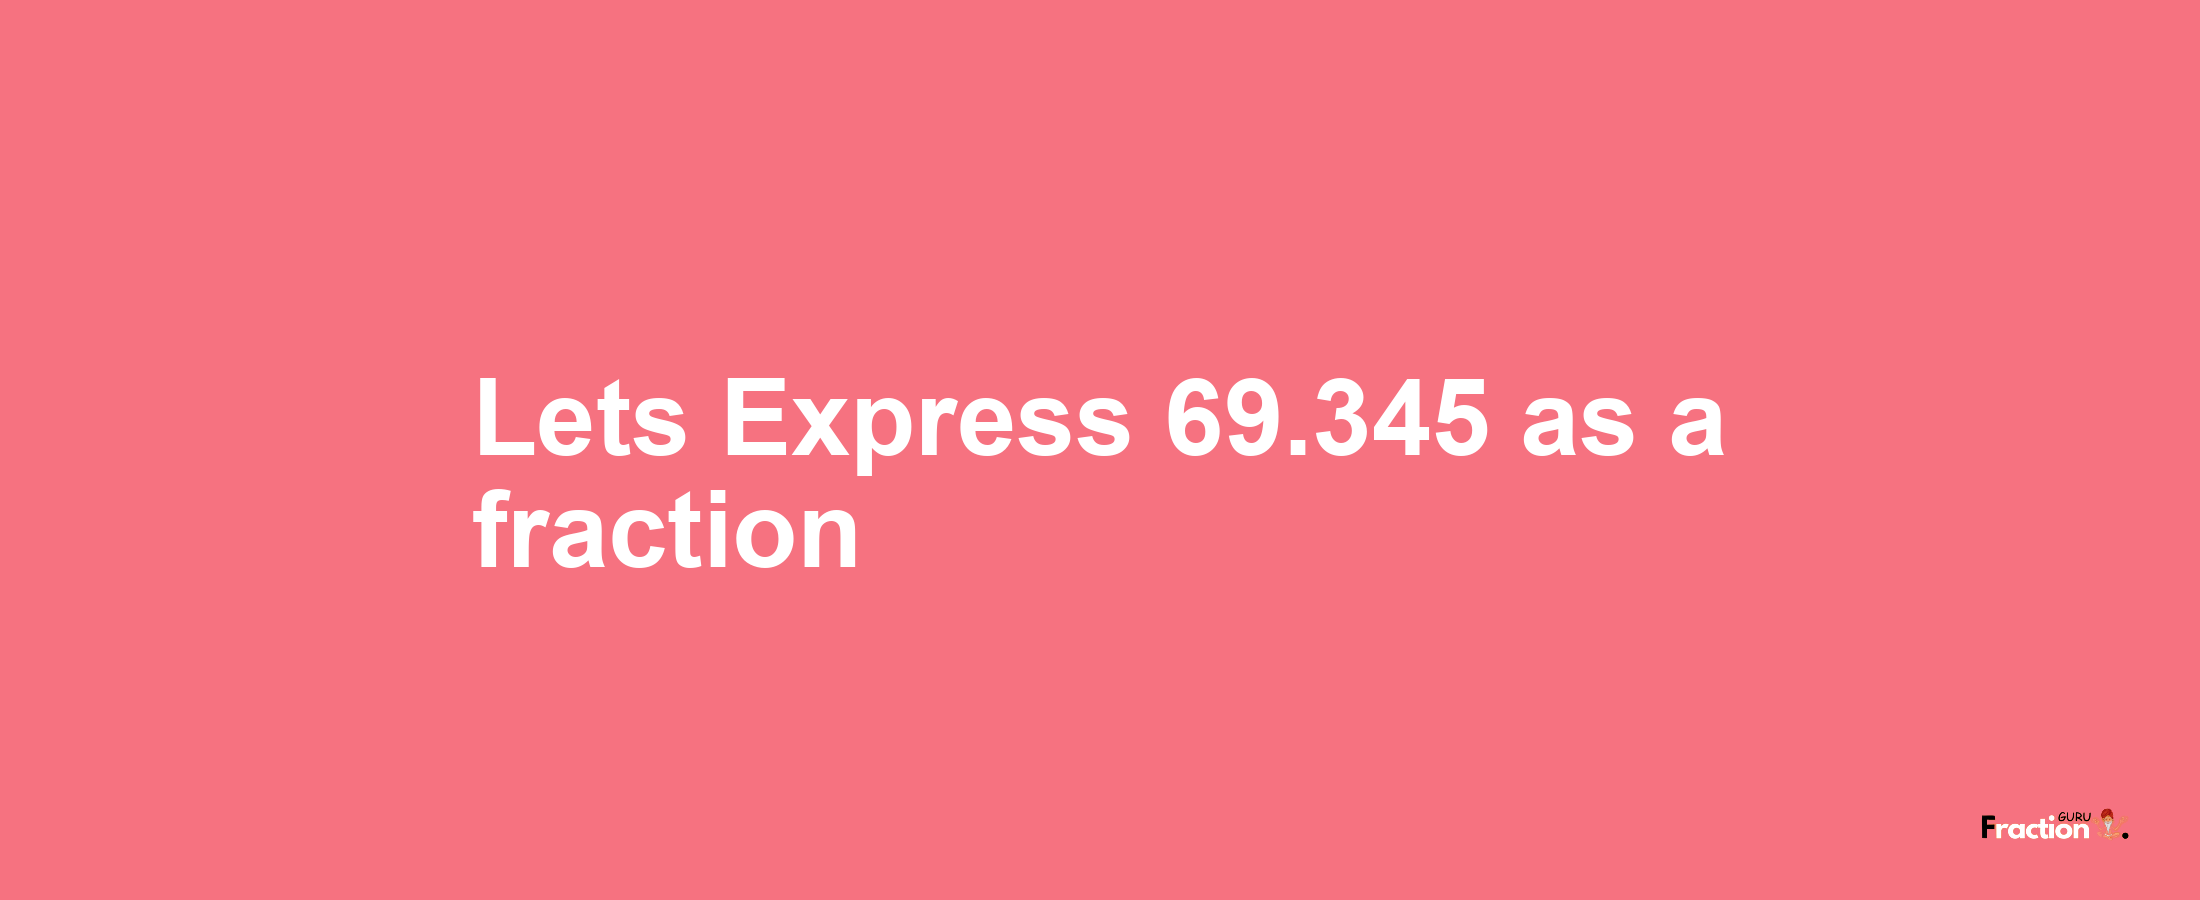 Lets Express 69.345 as afraction